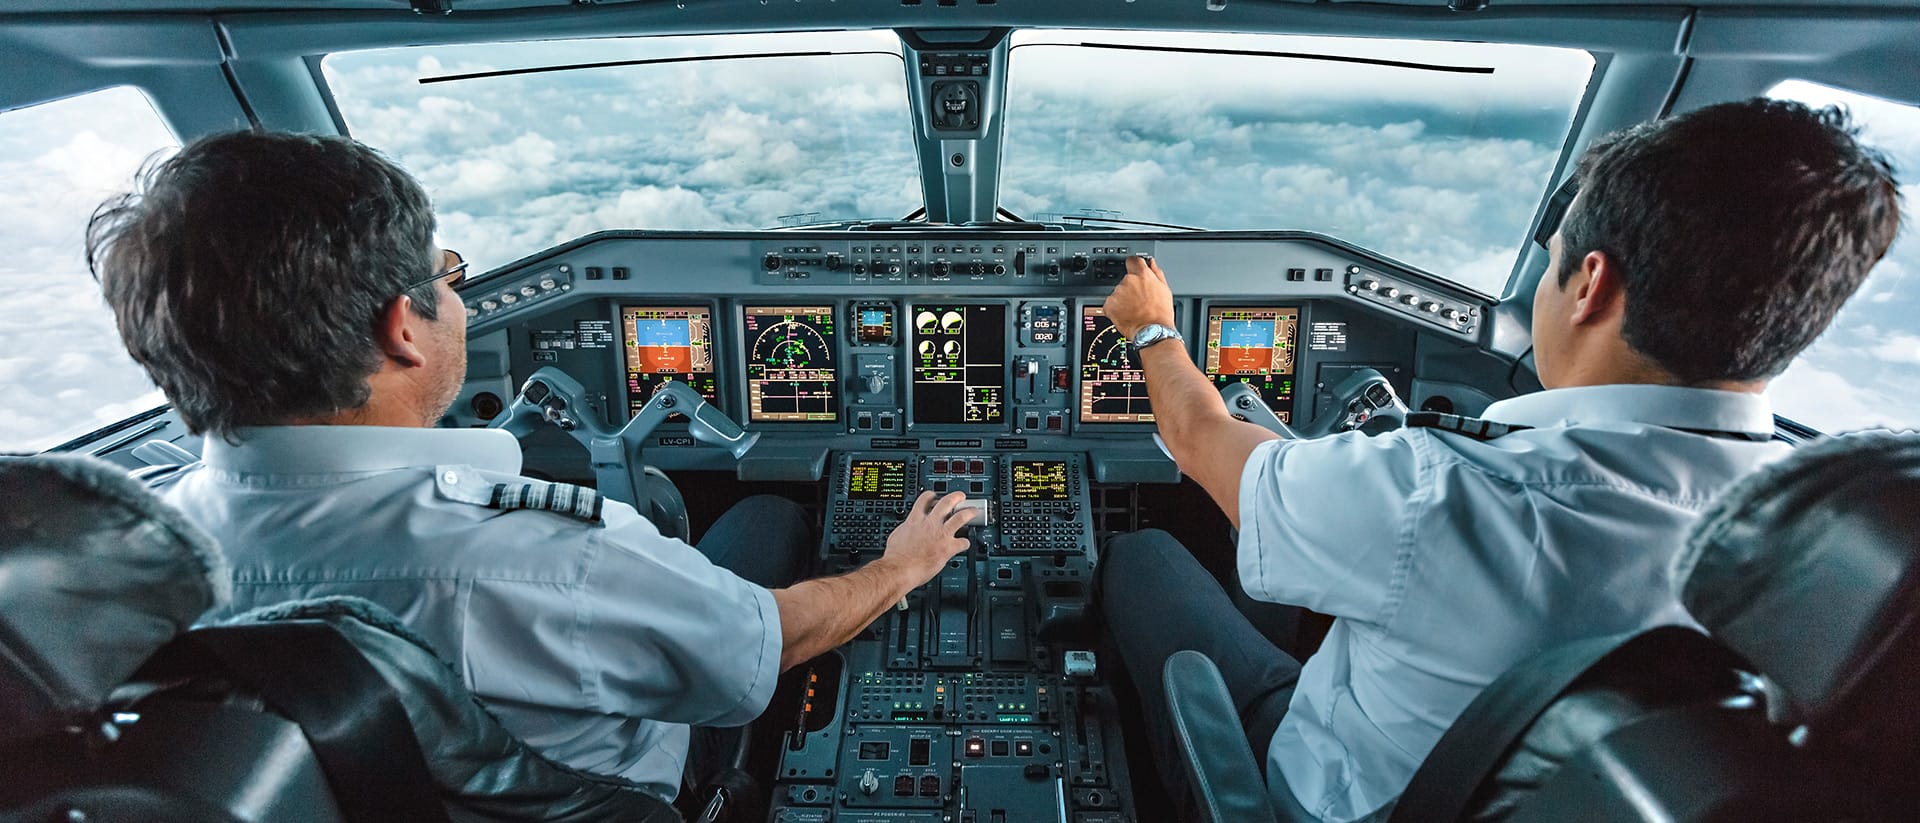 Pilots operating a commercial plane from the cockpit